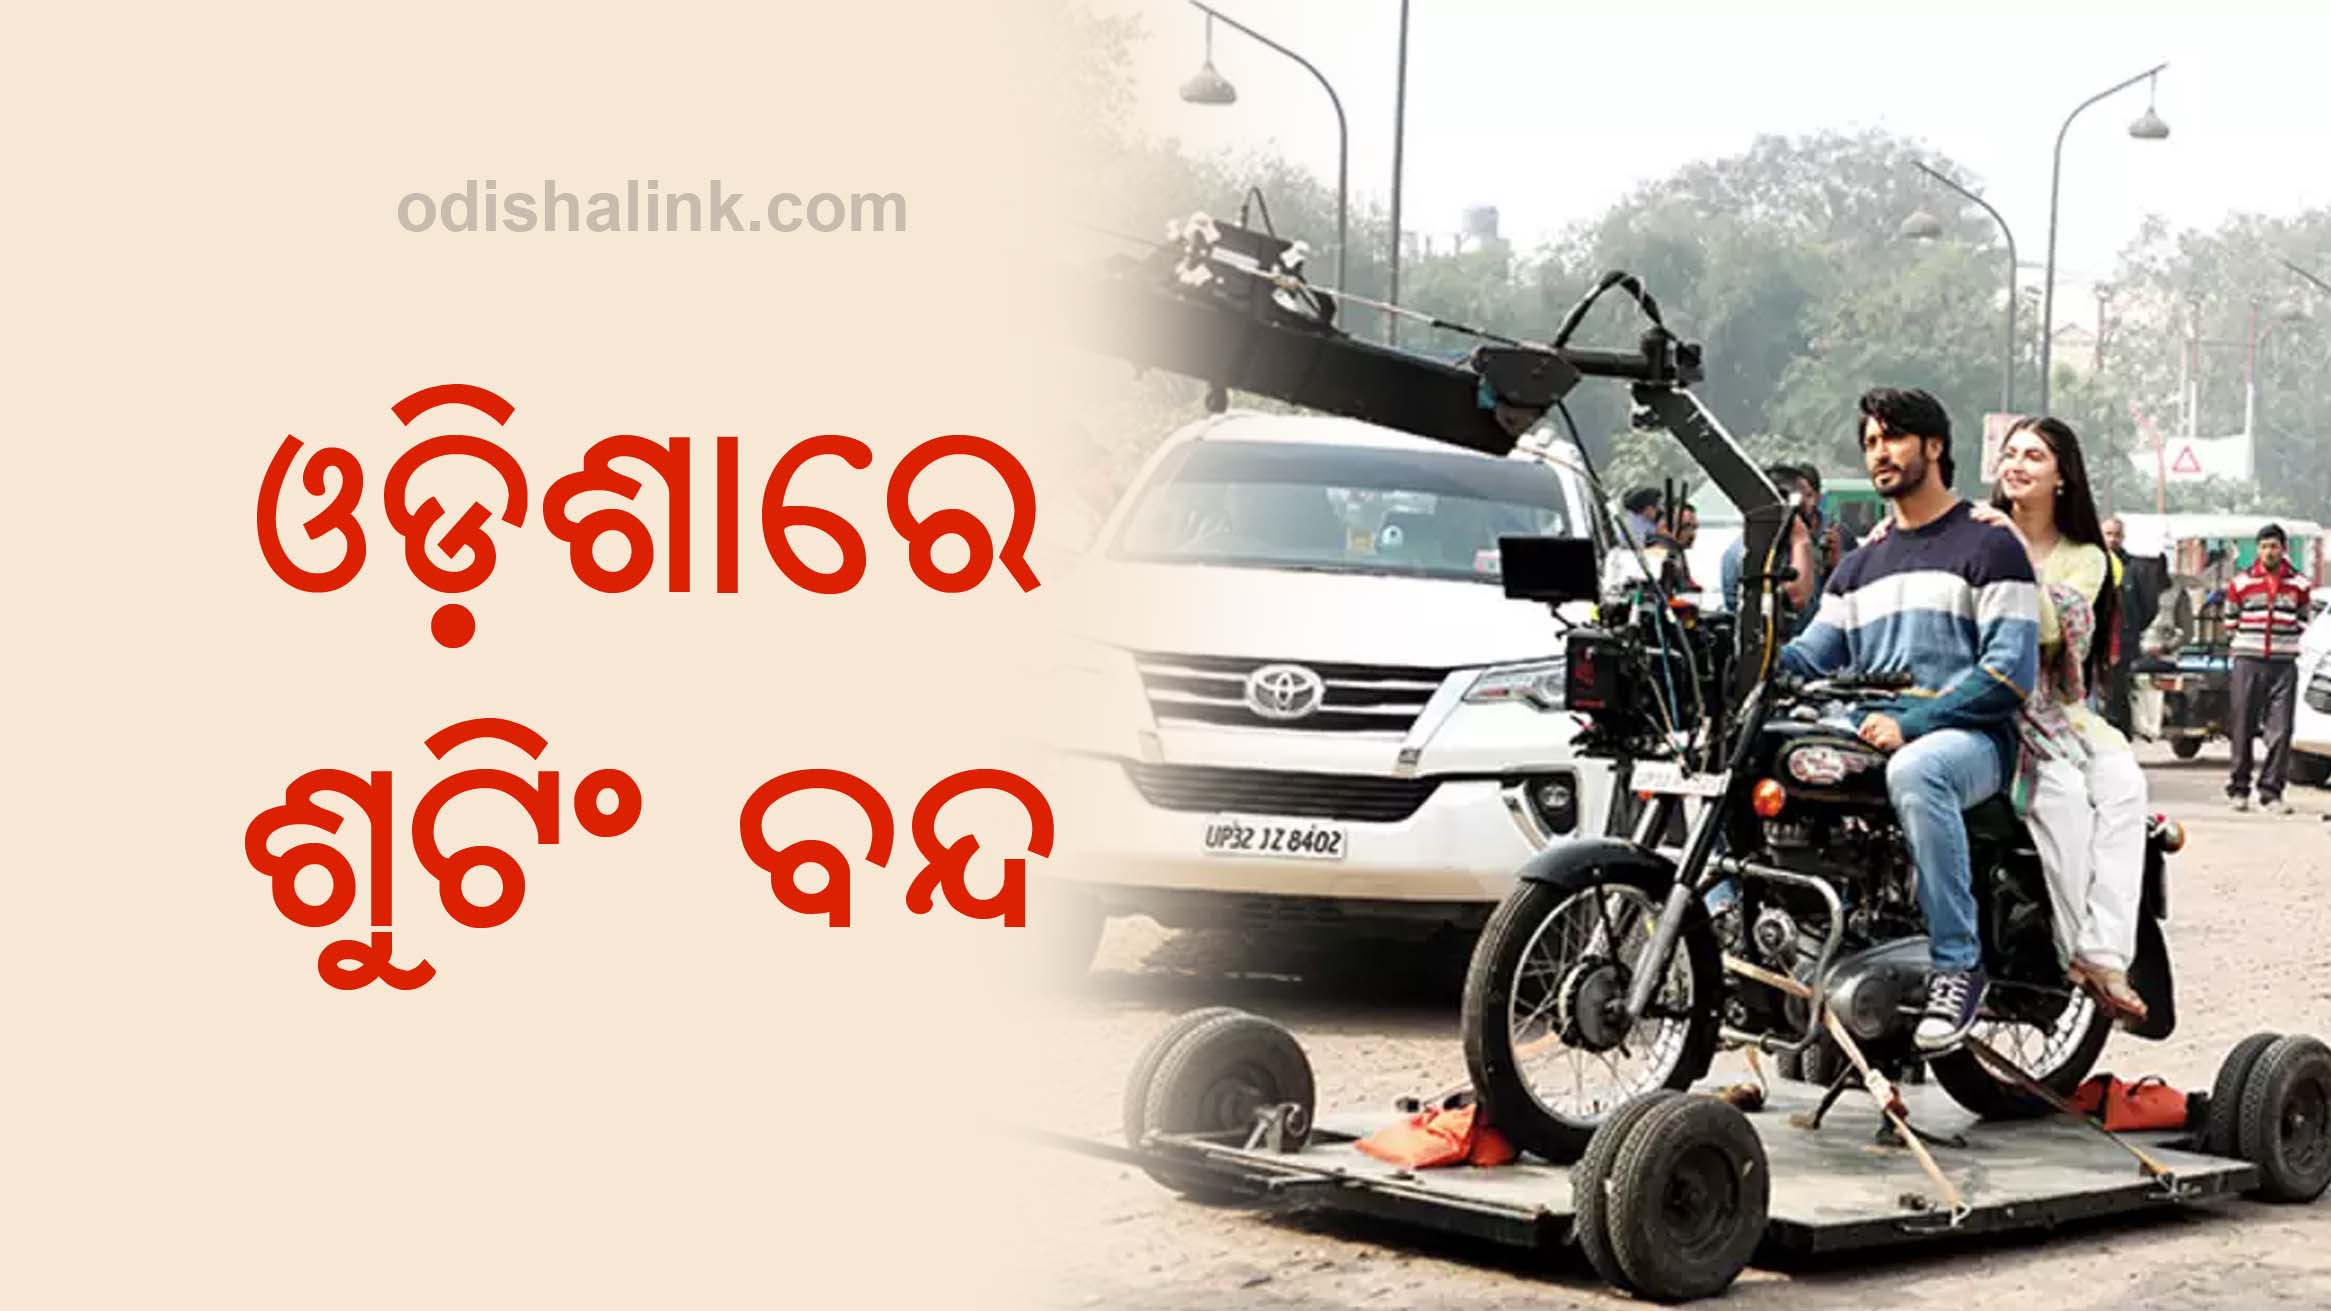 No shooting of movies and serials allowed in Odisha